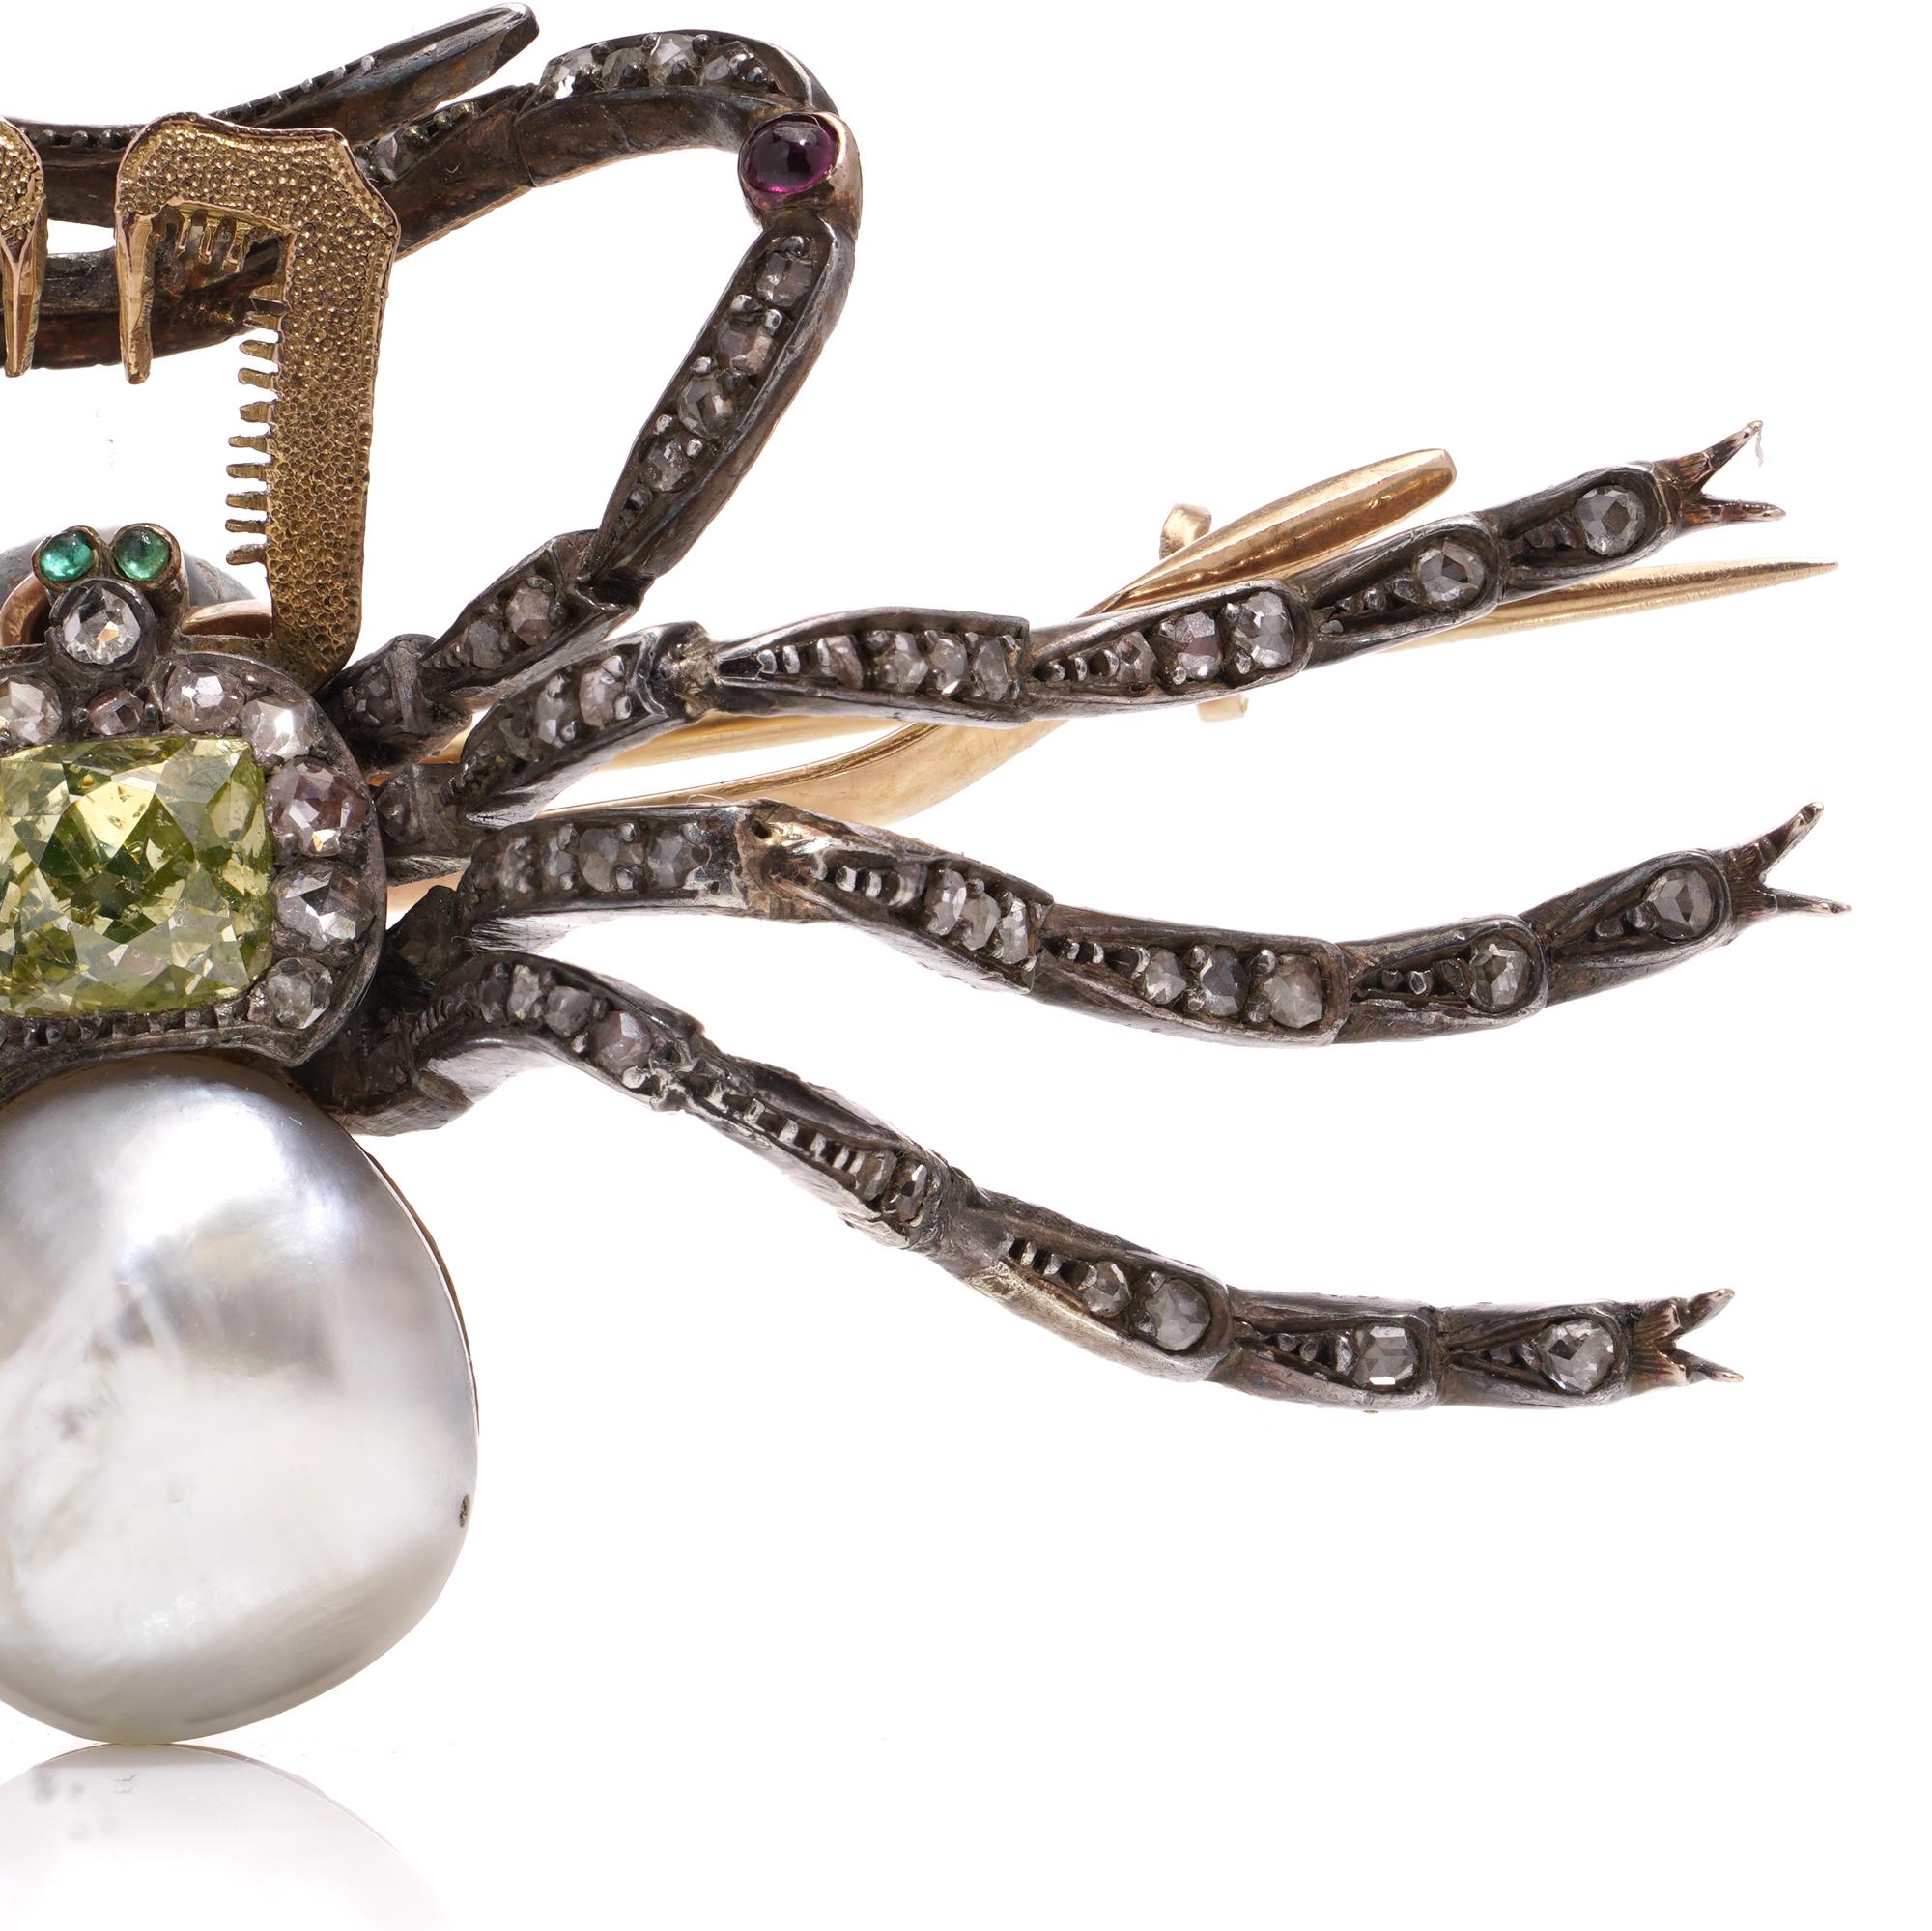 Antique French Victorian 18kt gold and silver spider brooch, crafted circa the 1890s. Featuring a cushion-cut yellow diamond body encased in a cluster of rose-cut diamonds, complemented by a bouton-shaped pearl. Its captivating cabochon emerald eyes